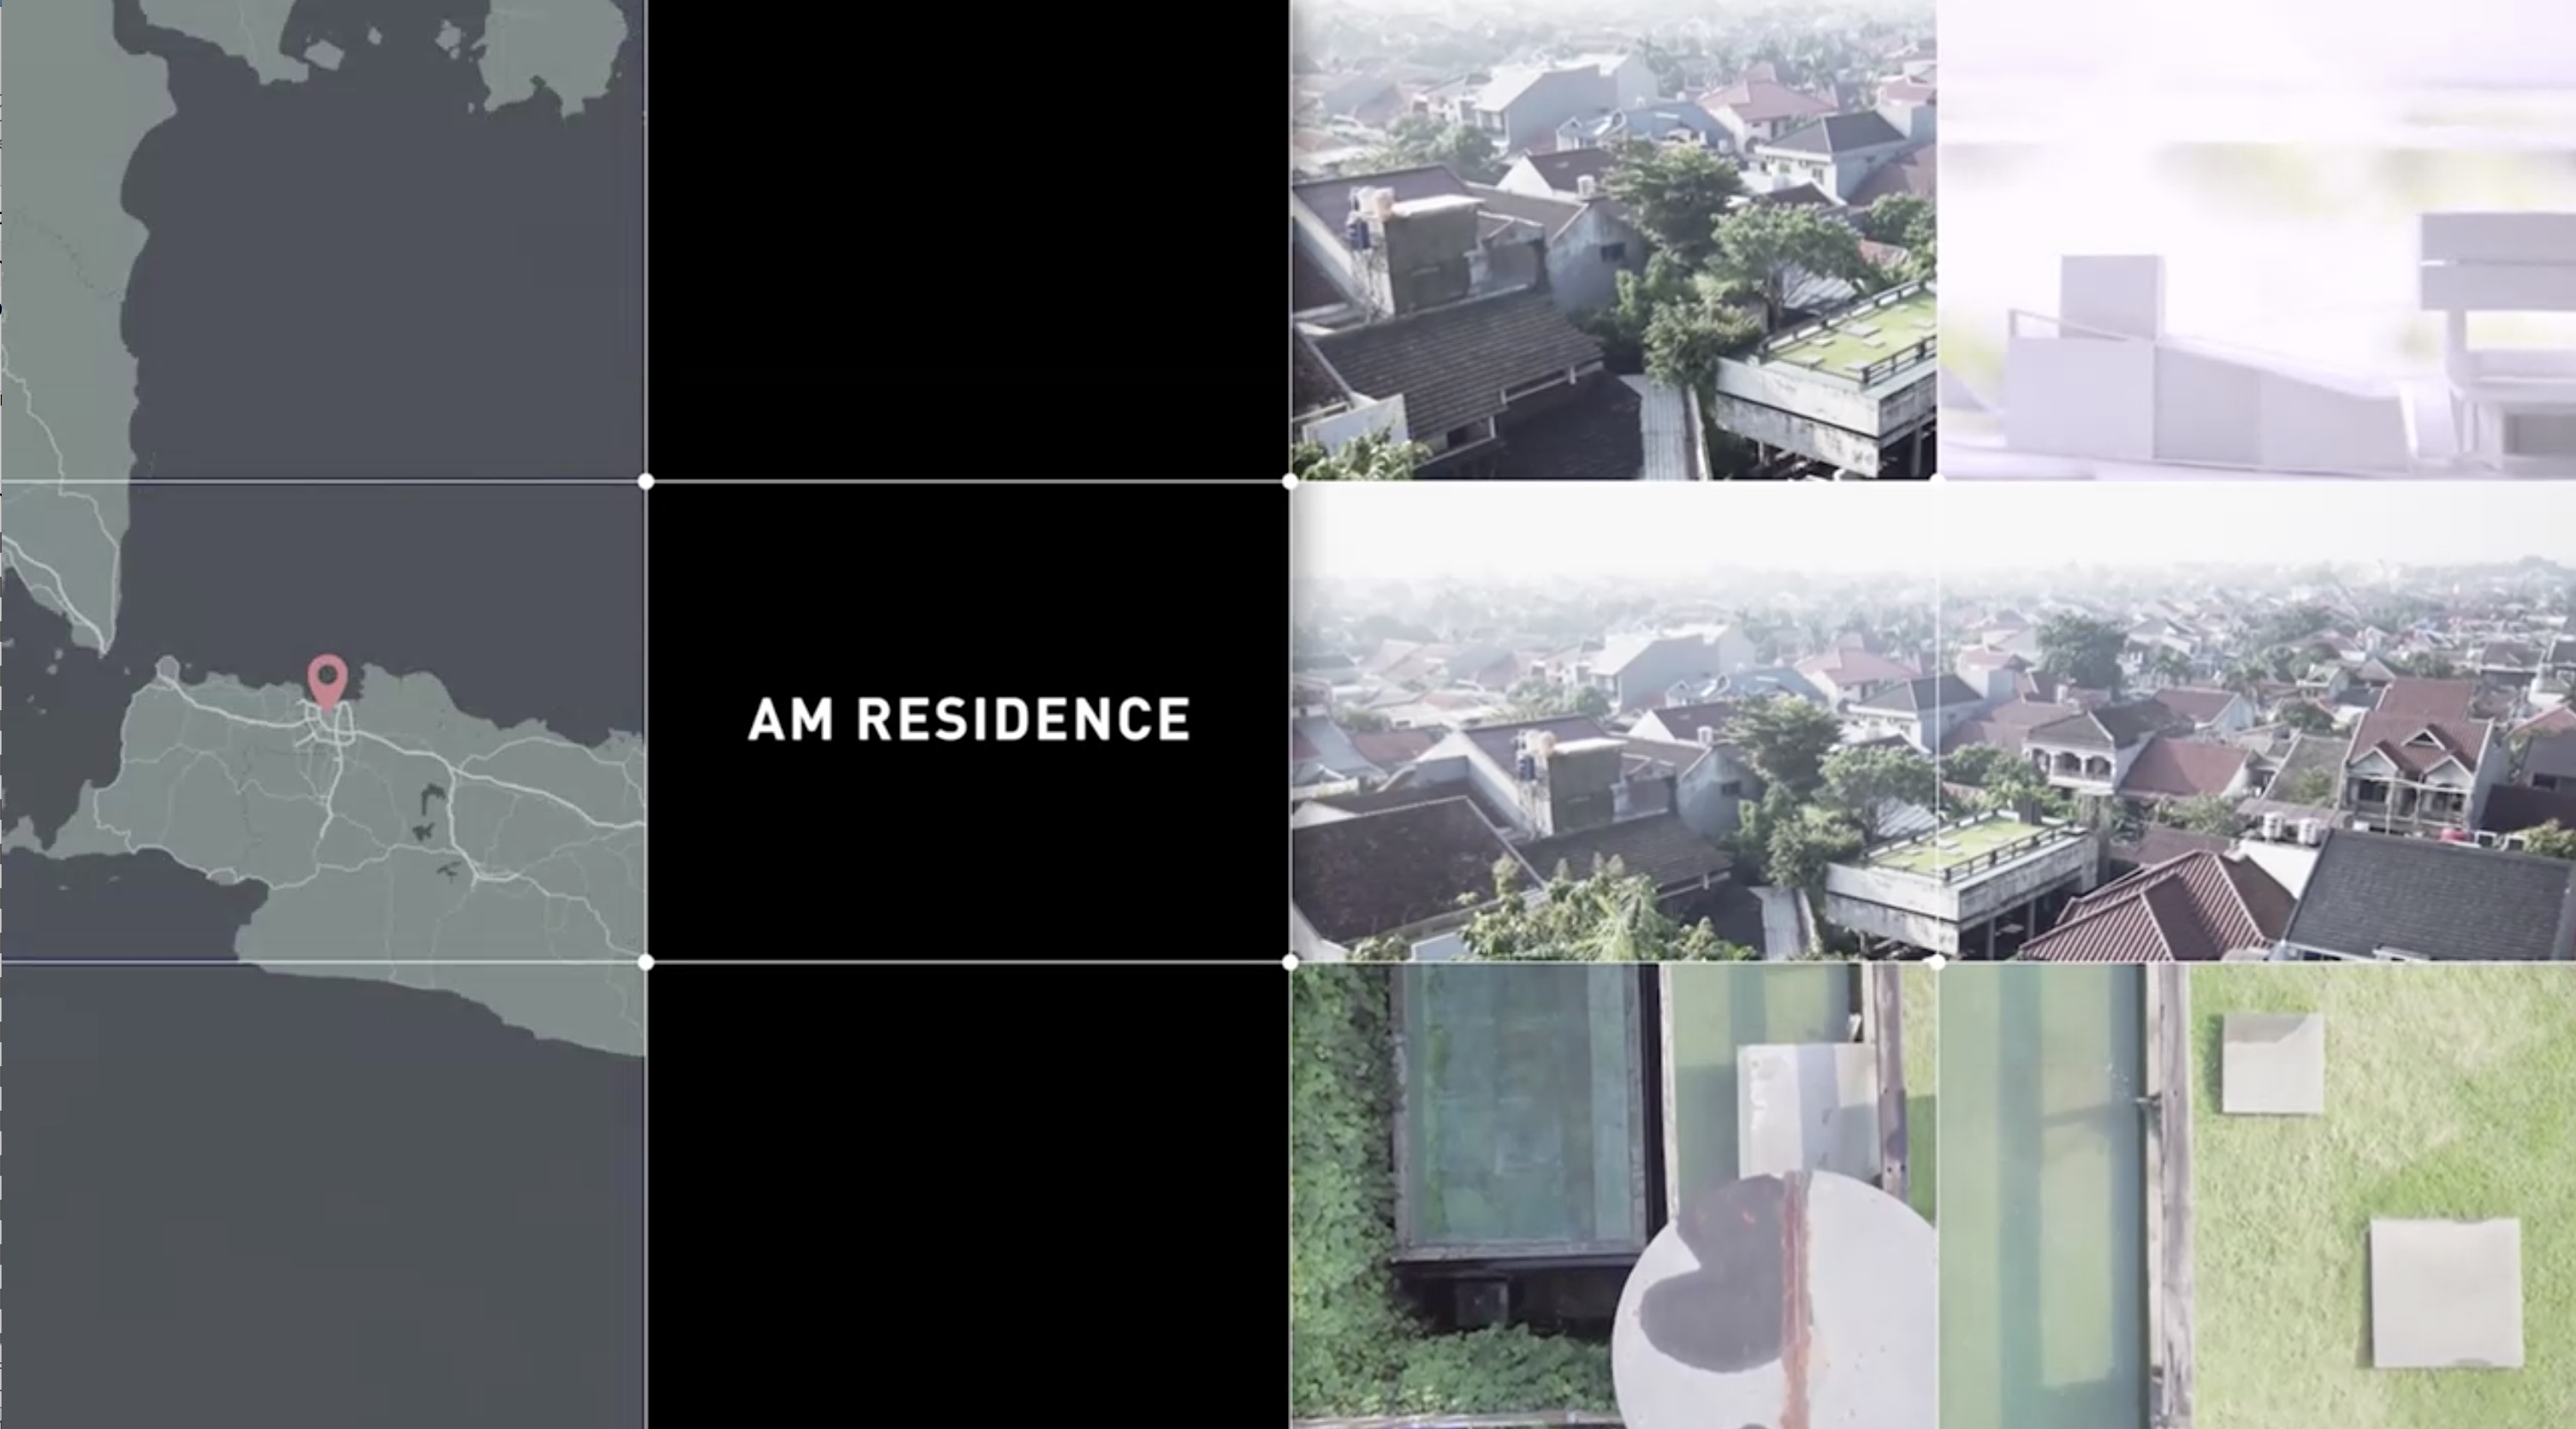 AM Residence  - Video Introduction to the AM Residence in Jakarta, Indonesia